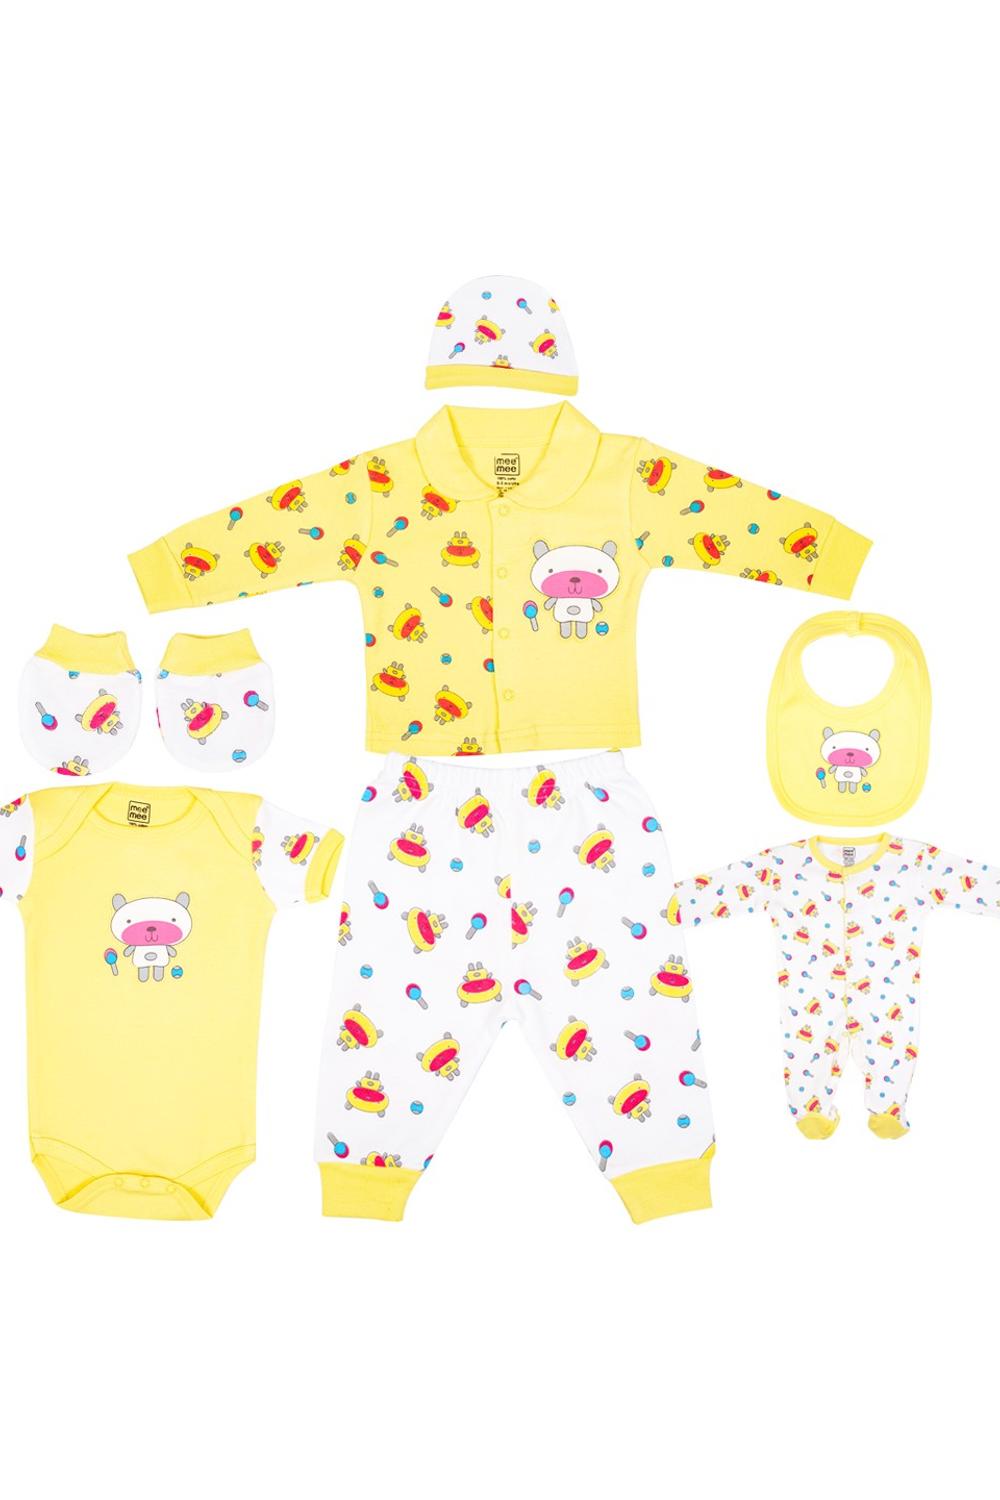 Mee Mee Clothing Gift Set Pack of 7 - Yellow